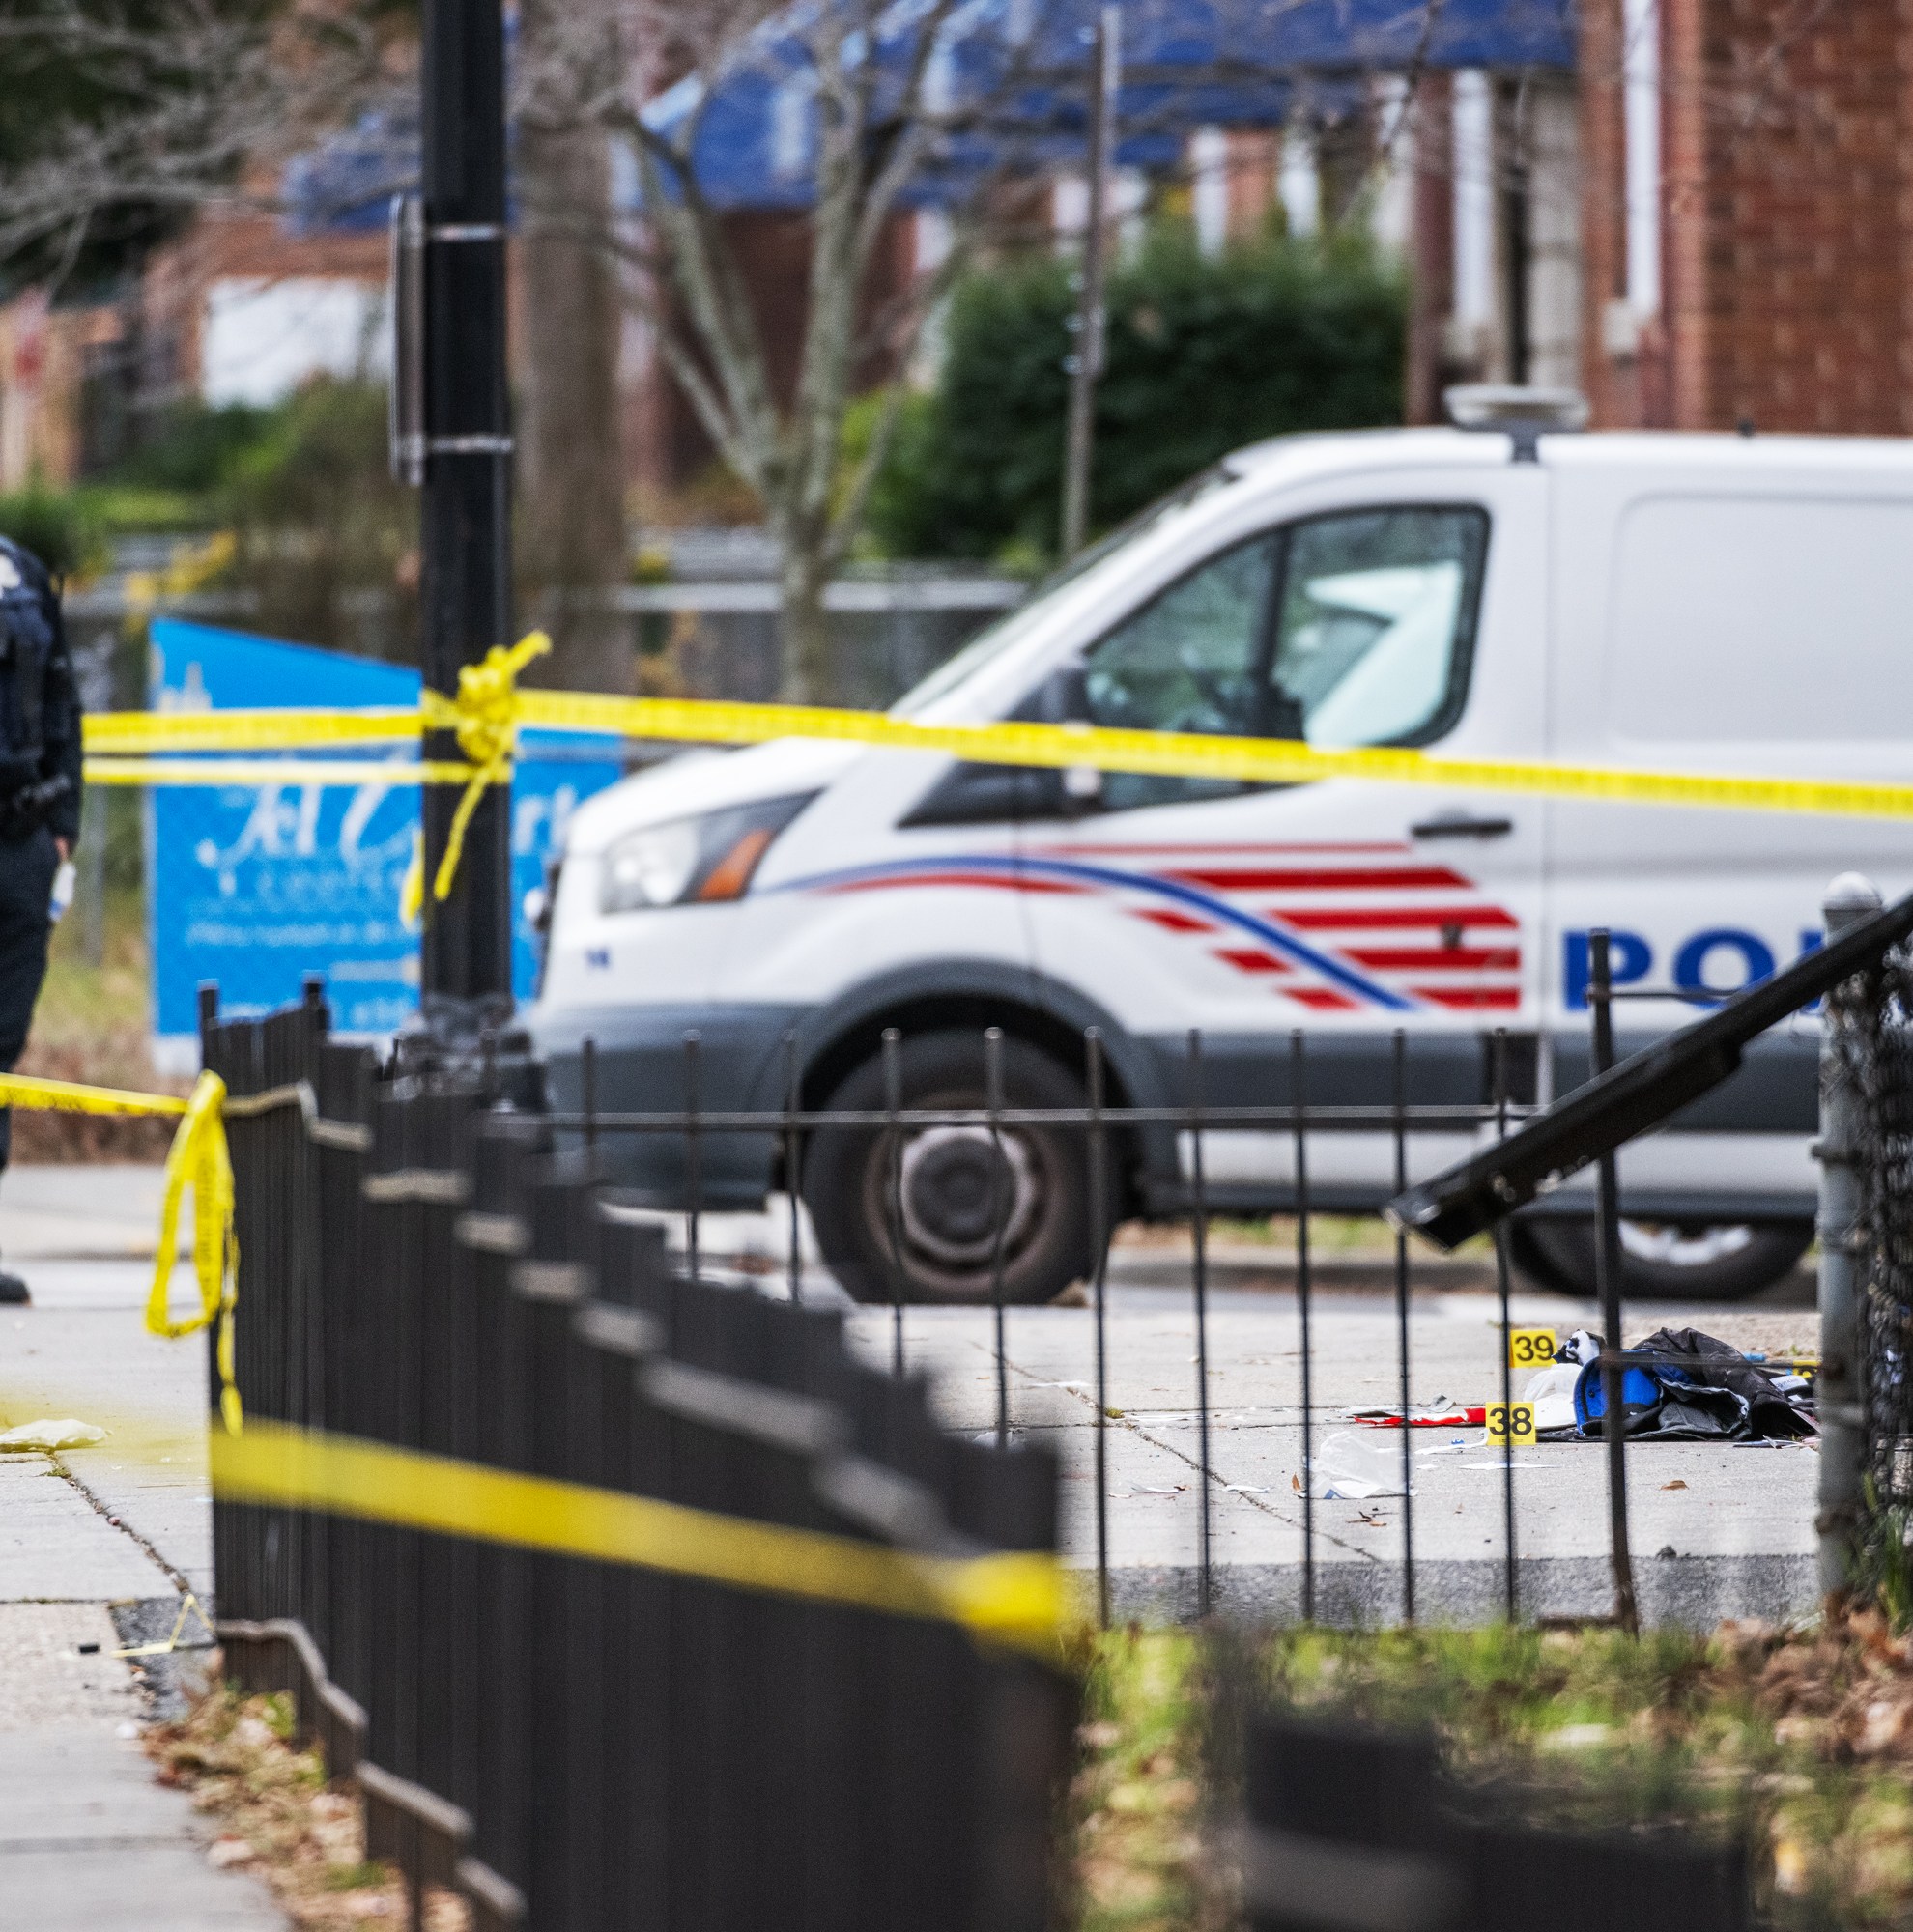 How the nation’s capital became an outlier on violent crime